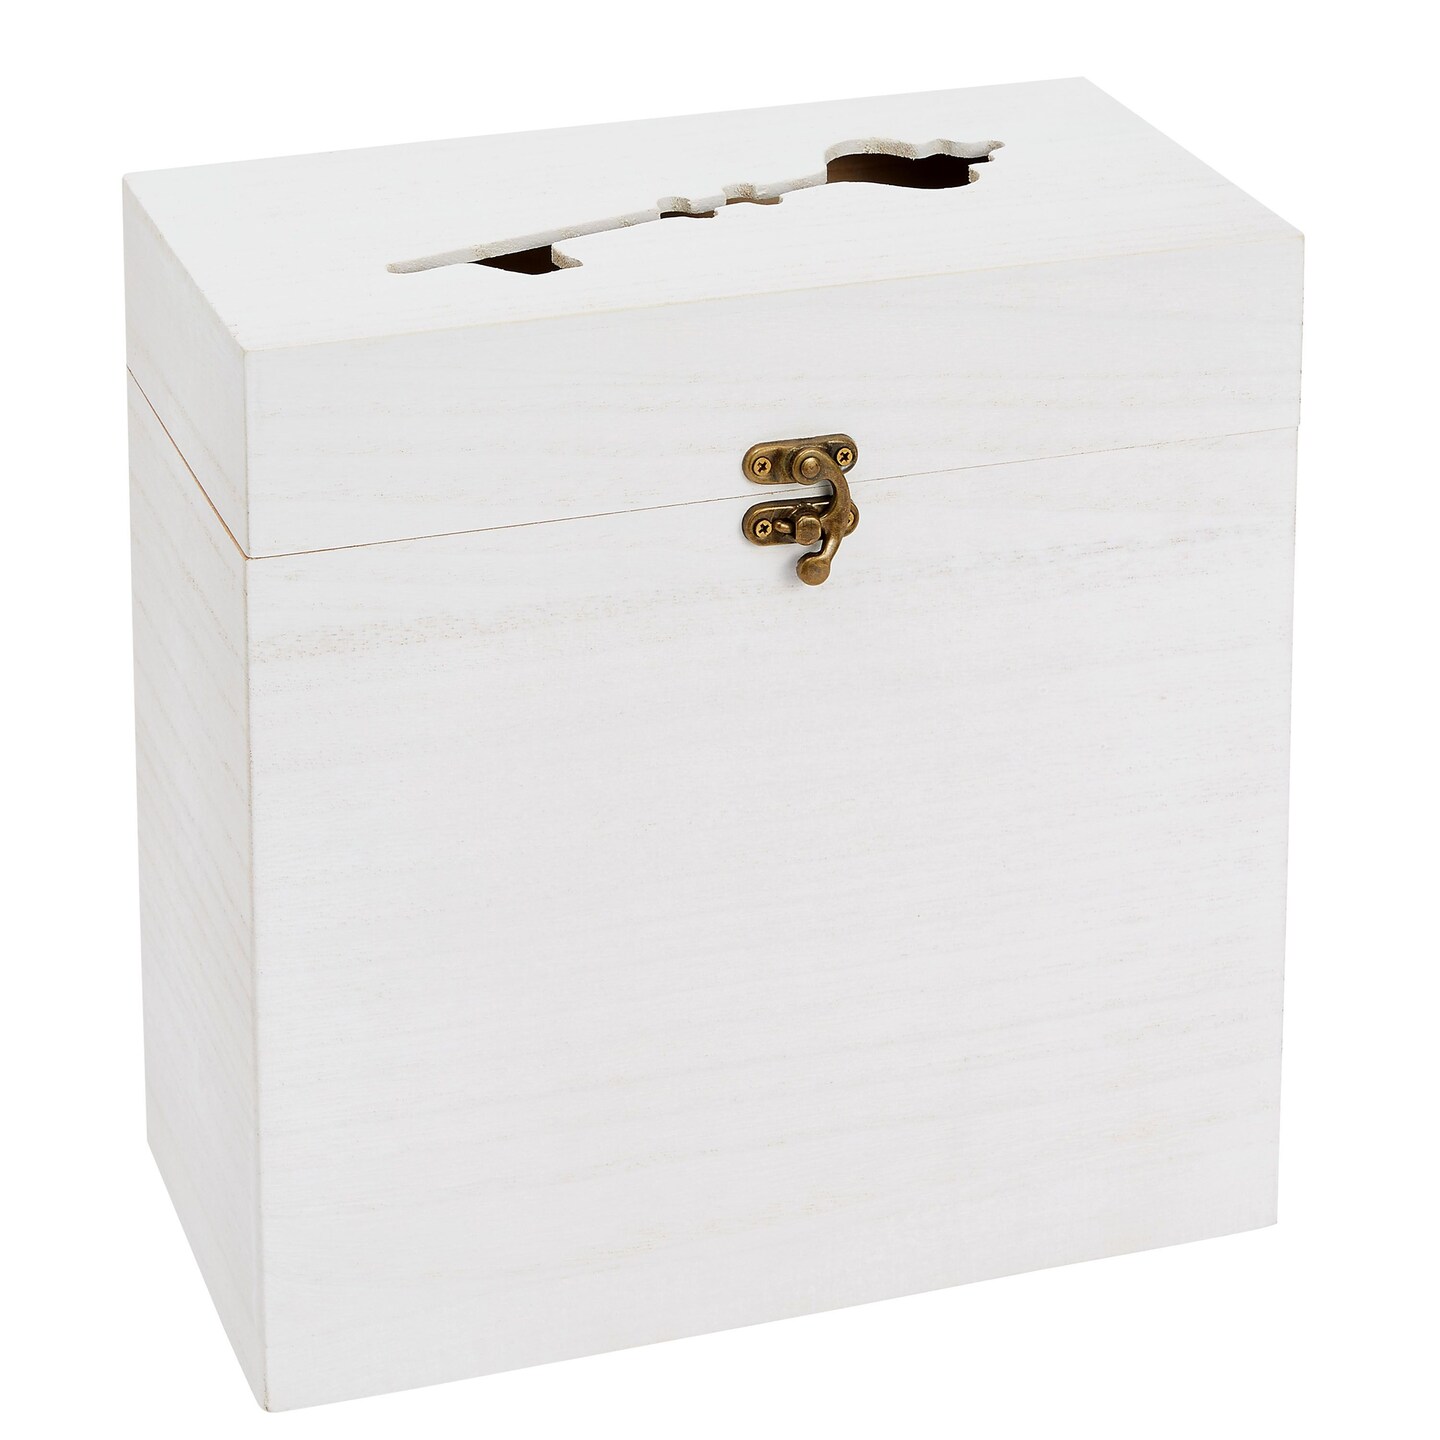 Rustic Wooden Wedding Card Box with Lock and Key Shaped Slot for Reception (White, 9.75 x 5 x 10 In)